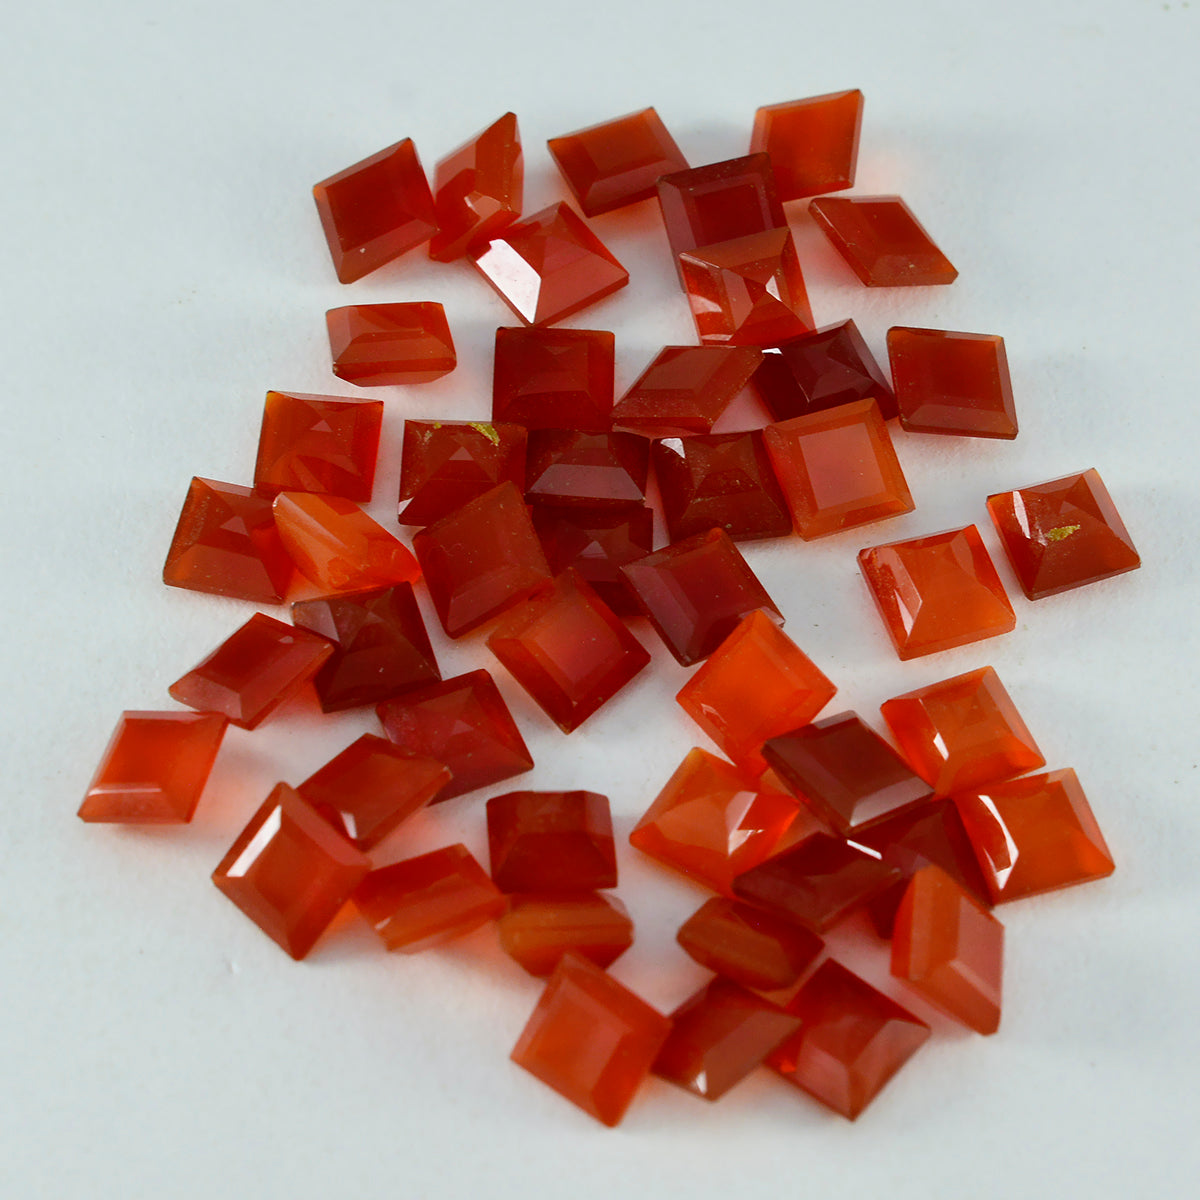 Riyogems 1PC Natural Red Onyx Faceted 6x6 mm Square Shape excellent Quality Stone